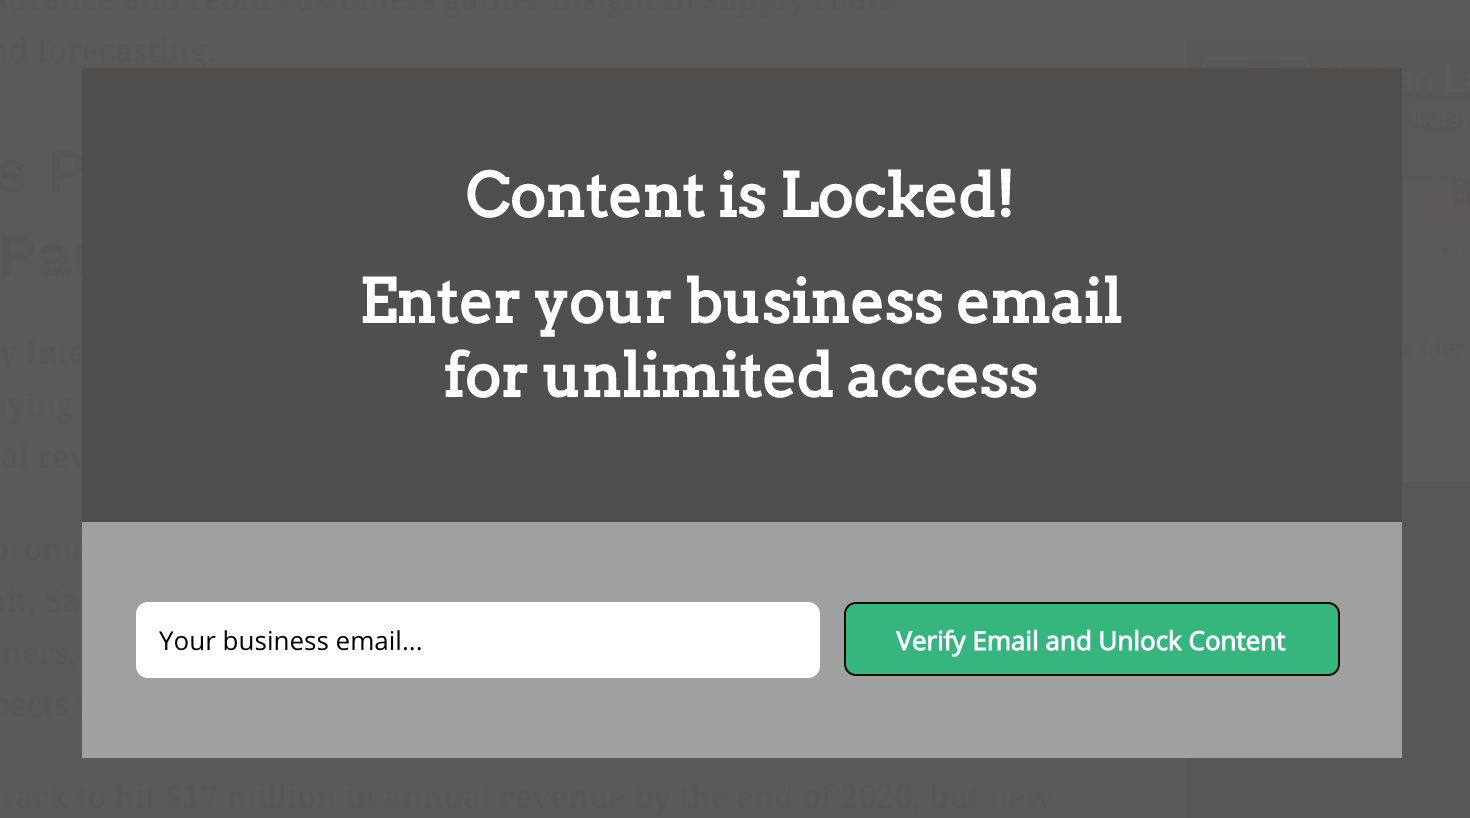 website popup to enter email and unlock website content